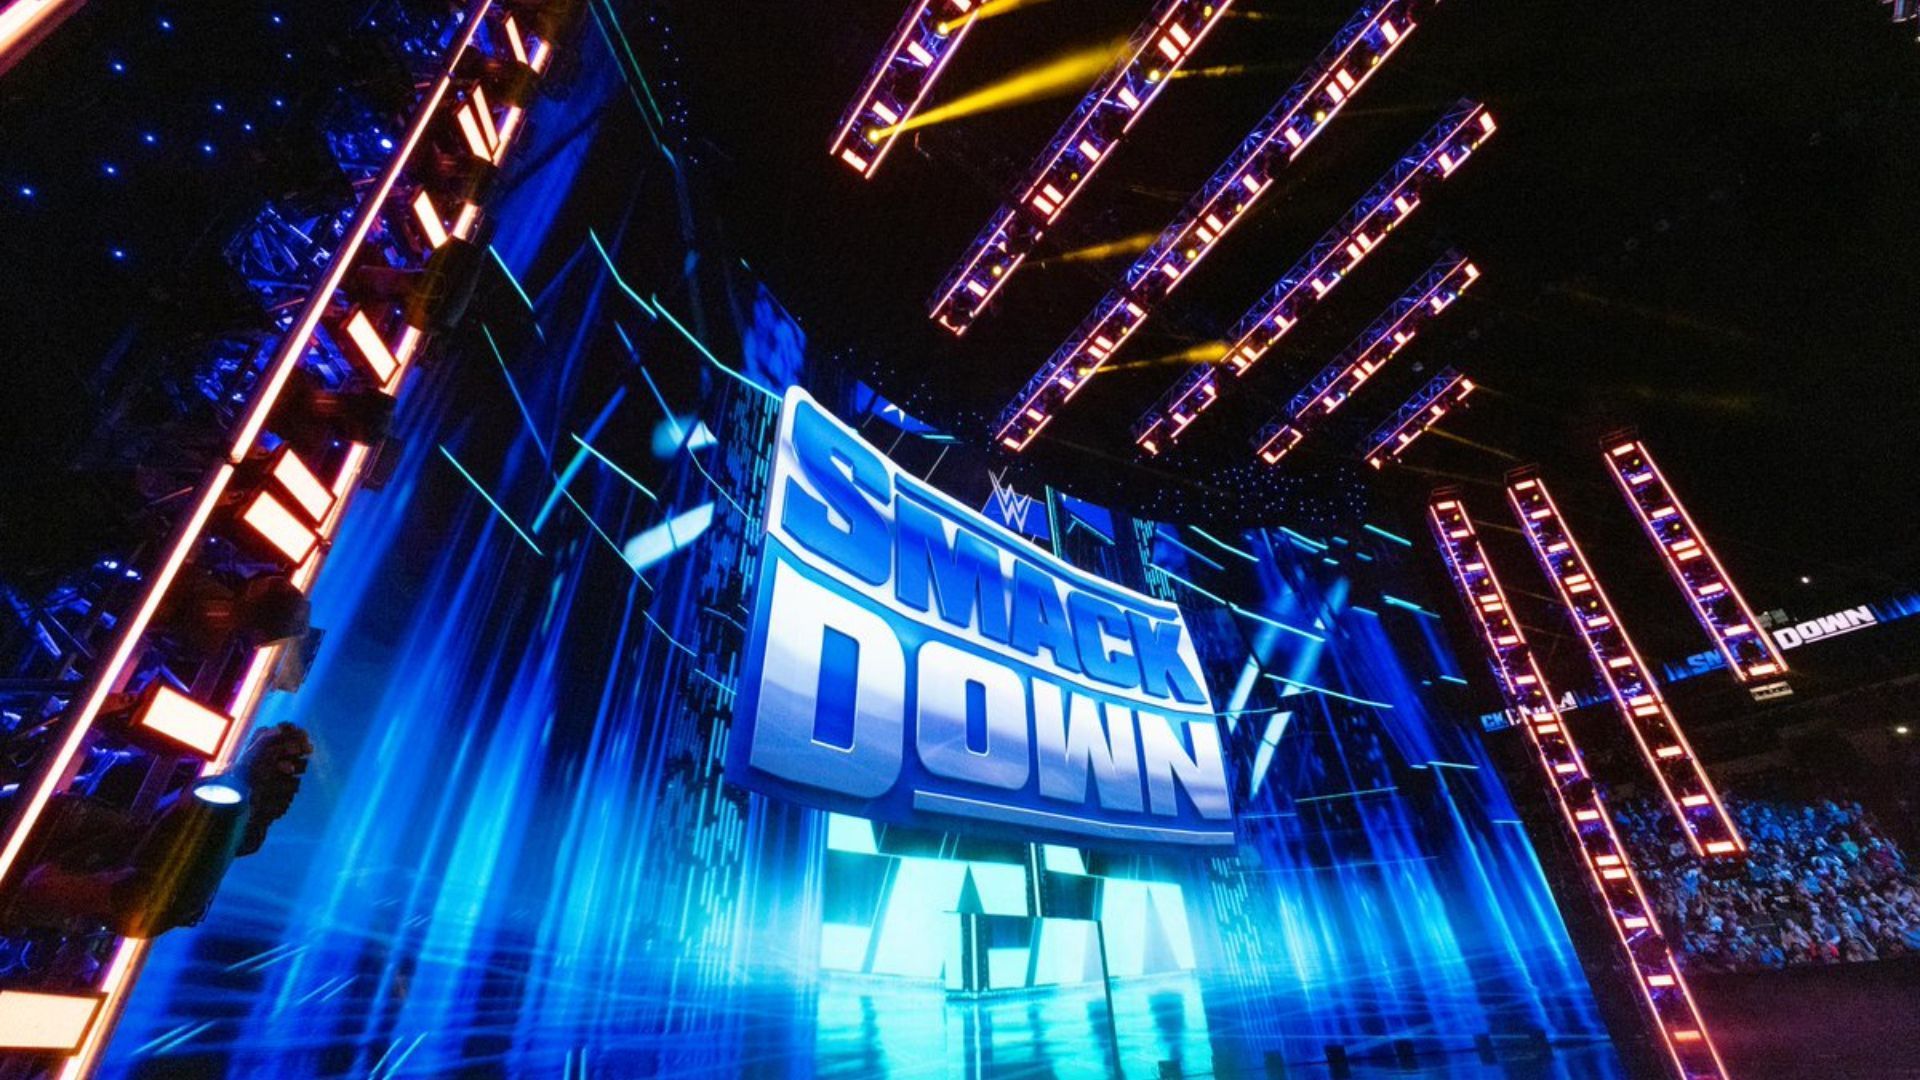 WWE SmackDown could see some changes soon